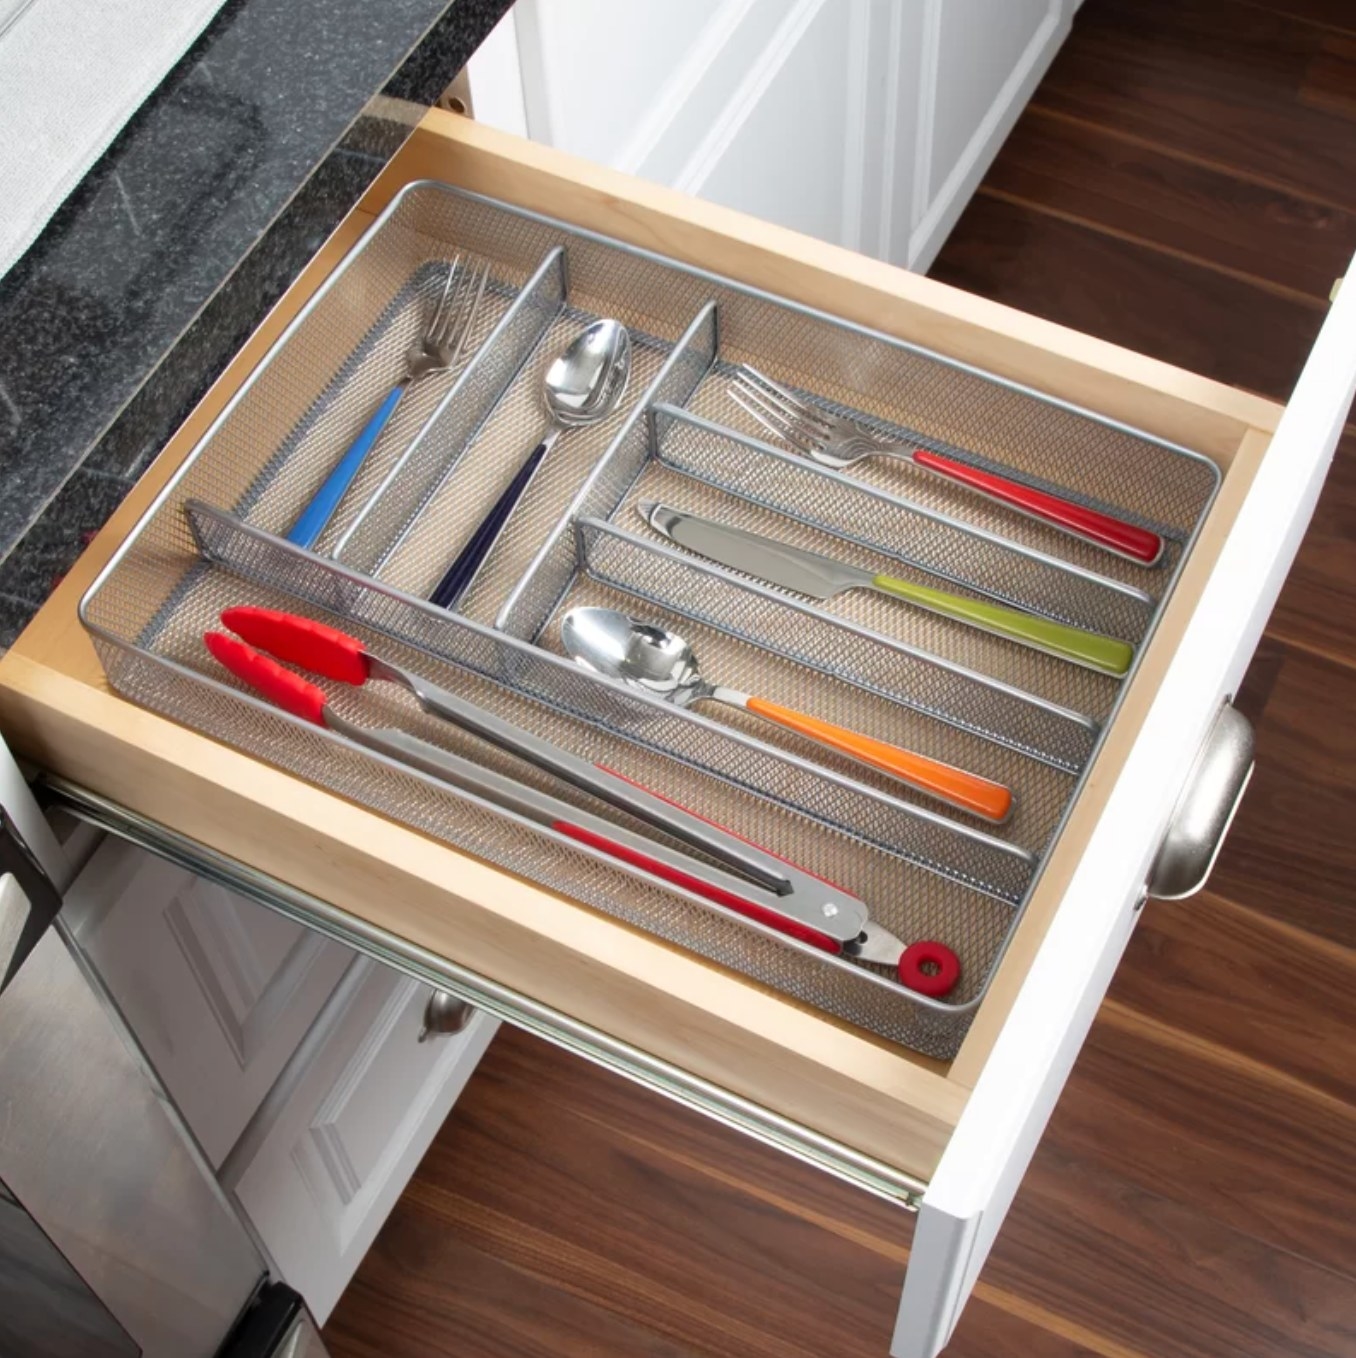 The drawer organizer being used to hold cutlery 